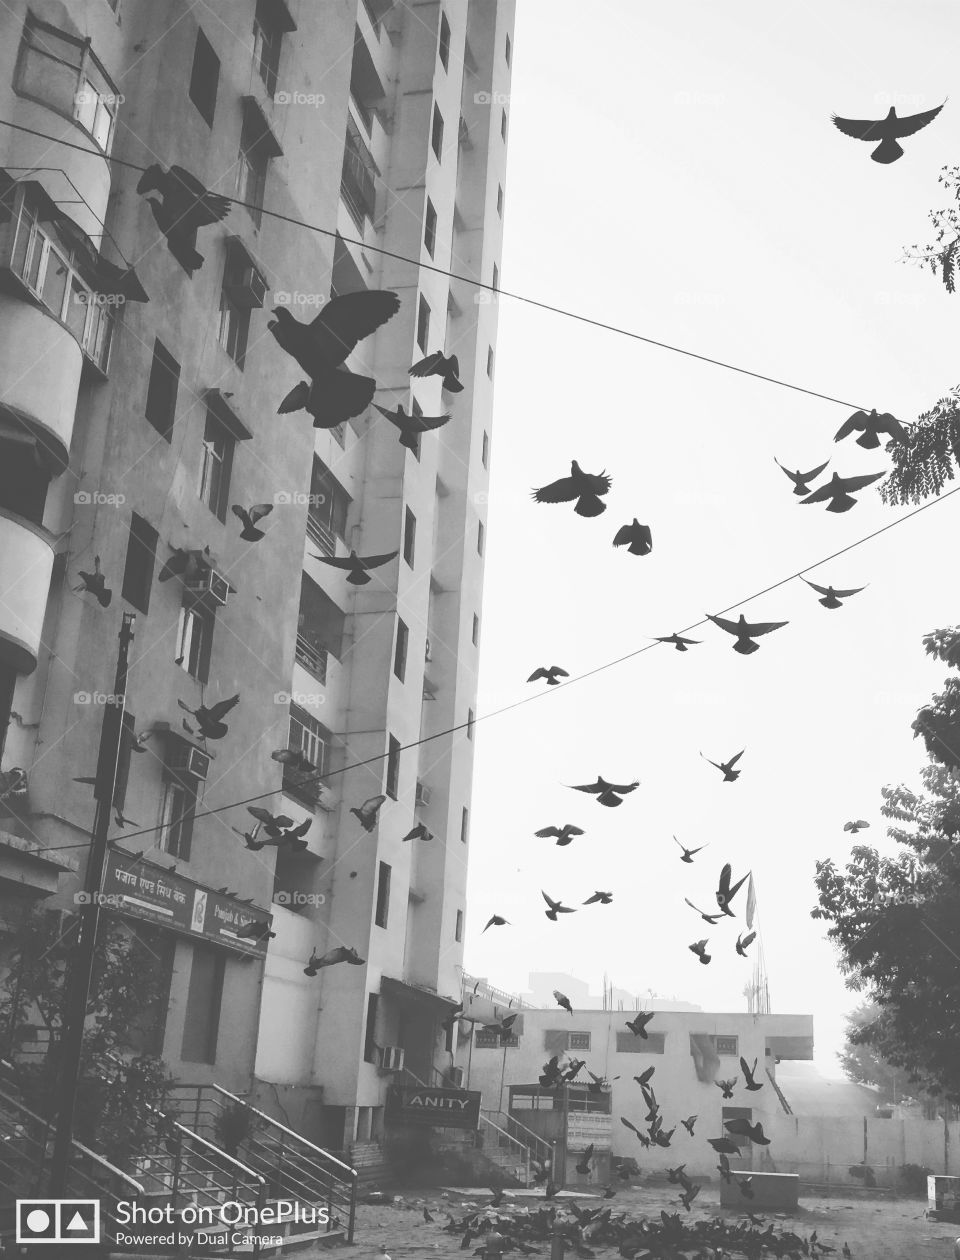 pigeons in the city